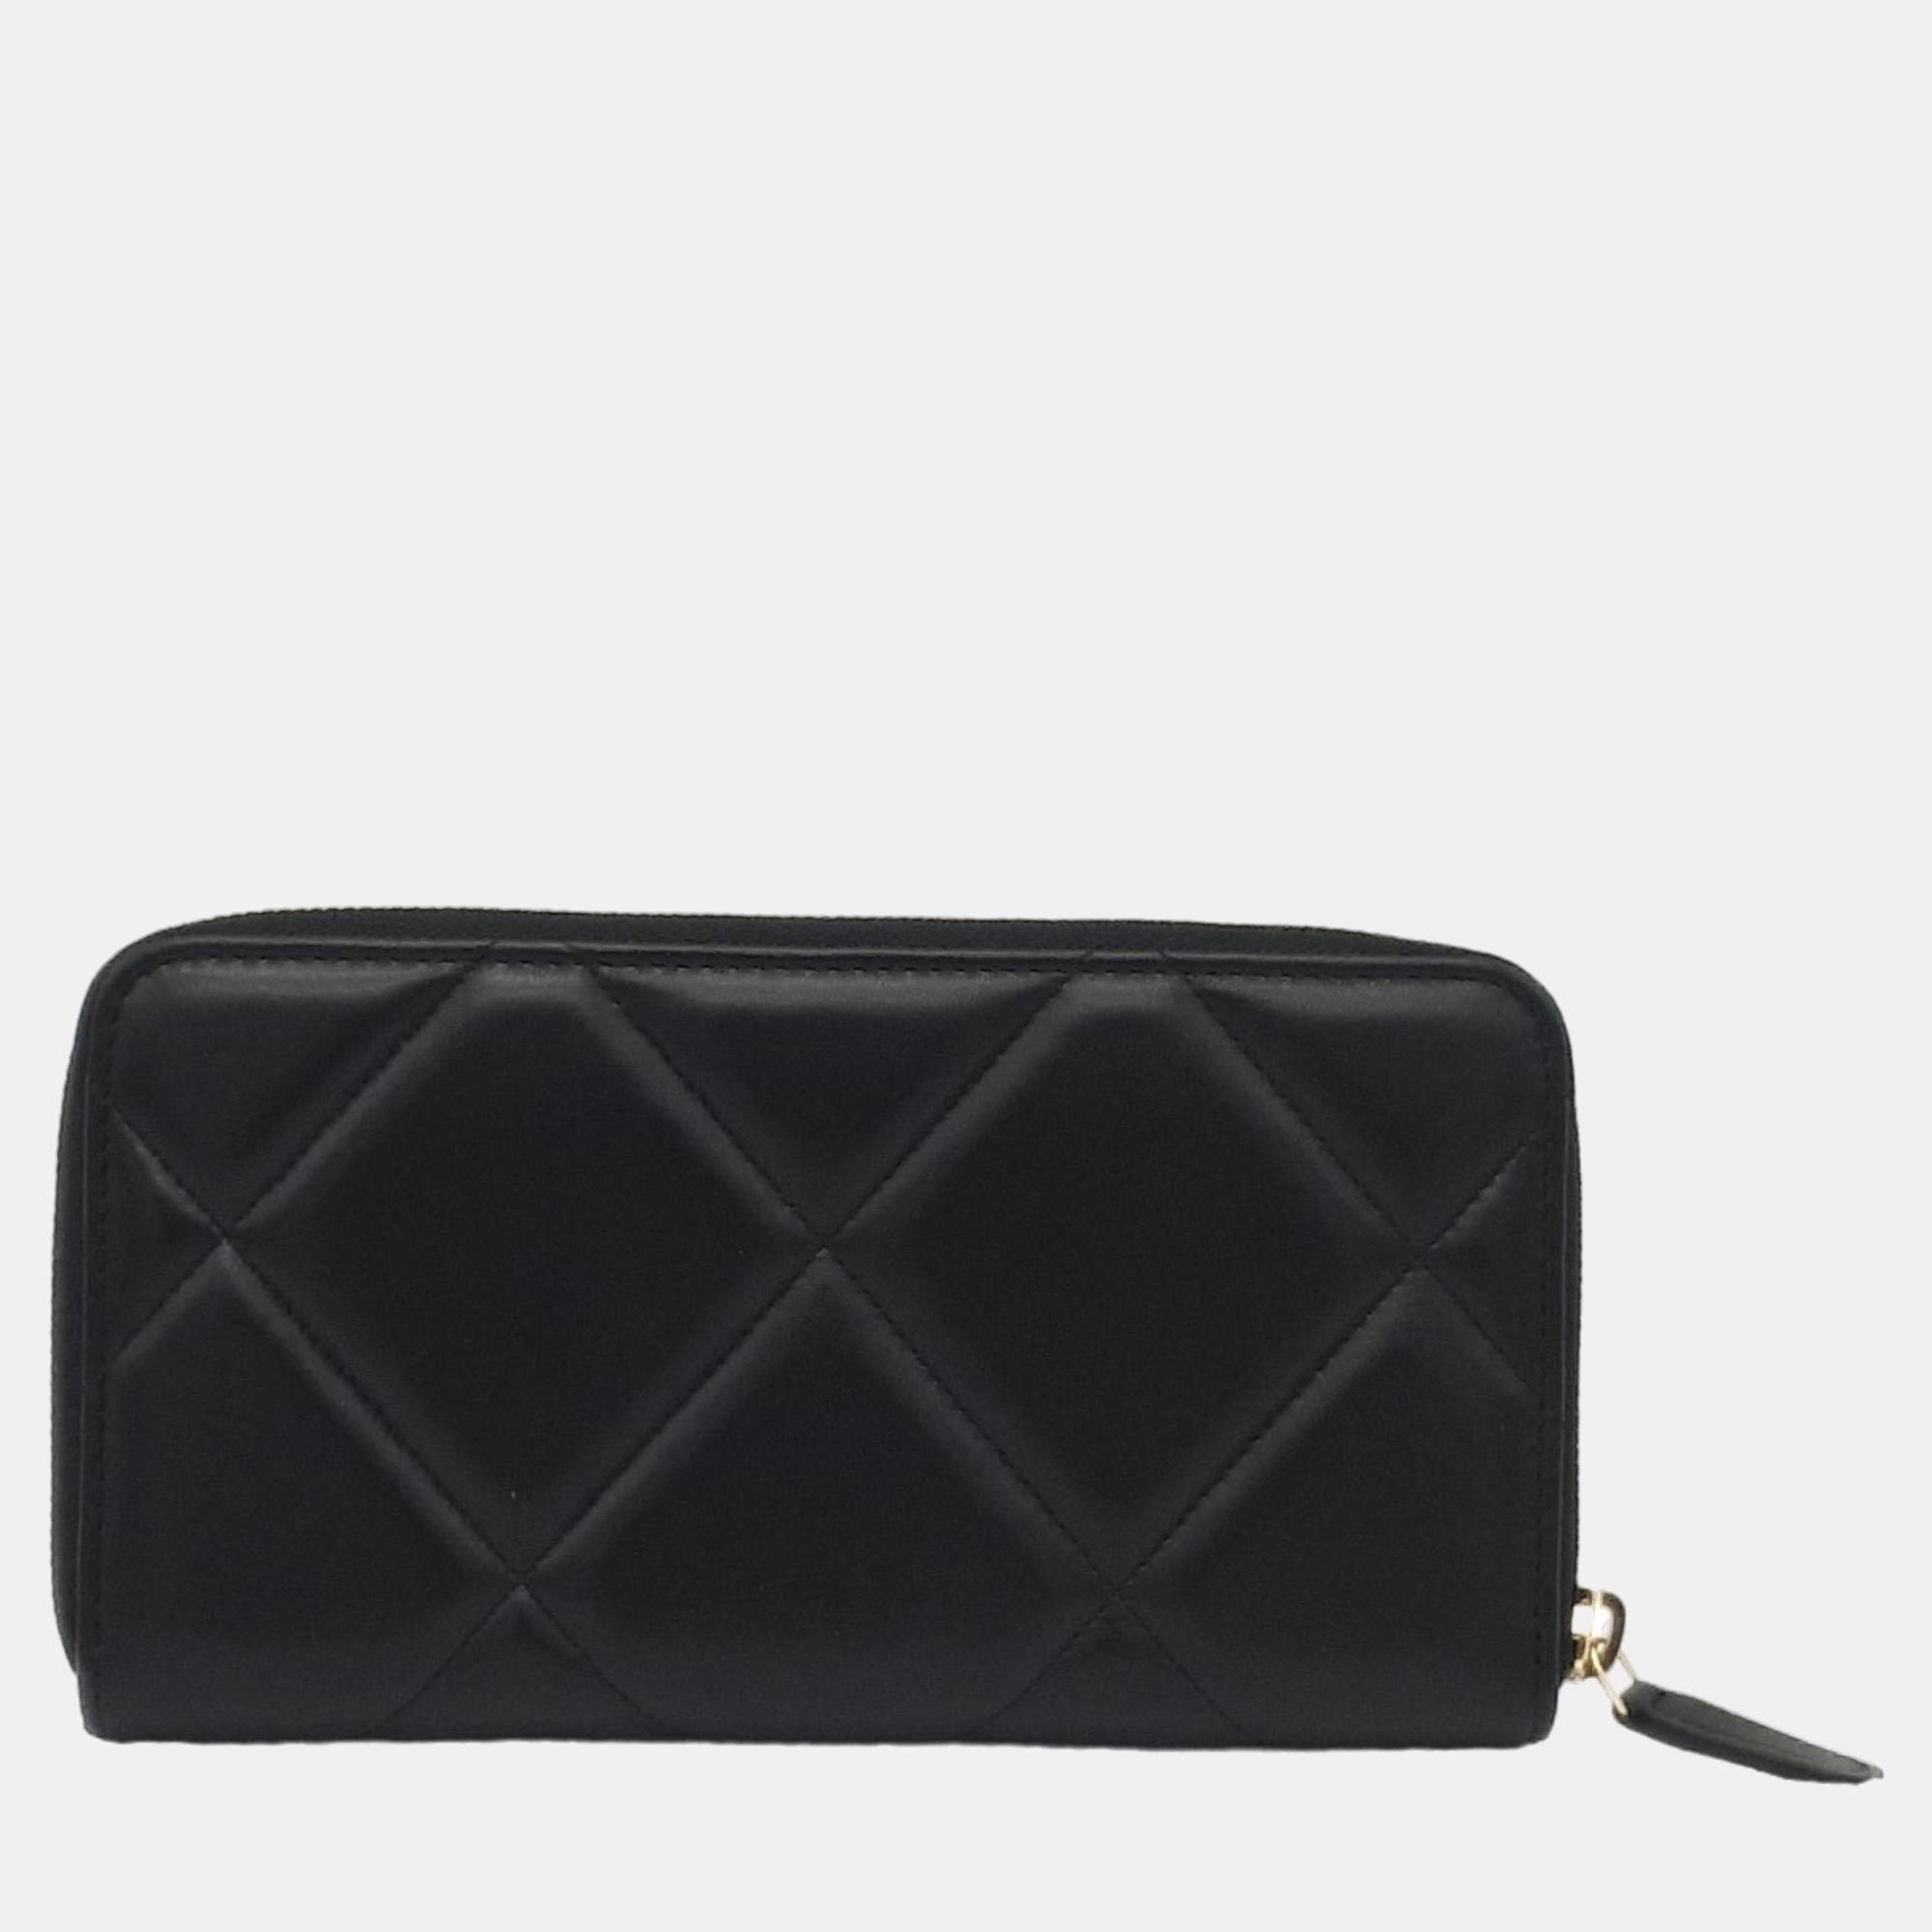 Chanel Black Leather 19 Continental Wallet